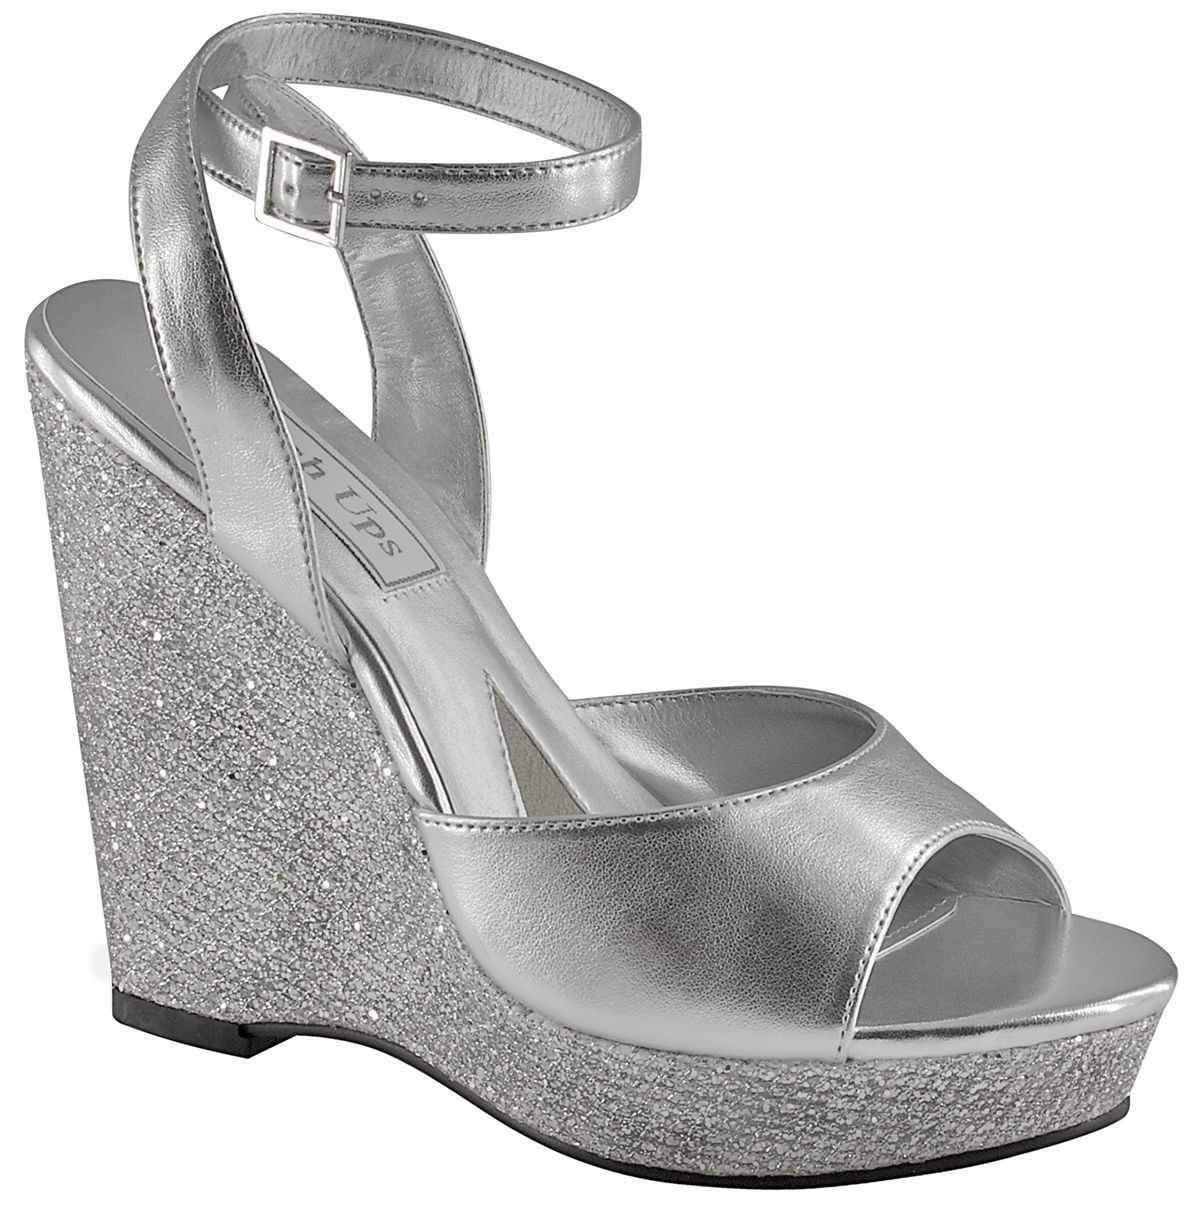 Silver Wedge Shoes For Wedding
 silver Touch Ups Viviana Bridal Shoes $55 99 "Feminine